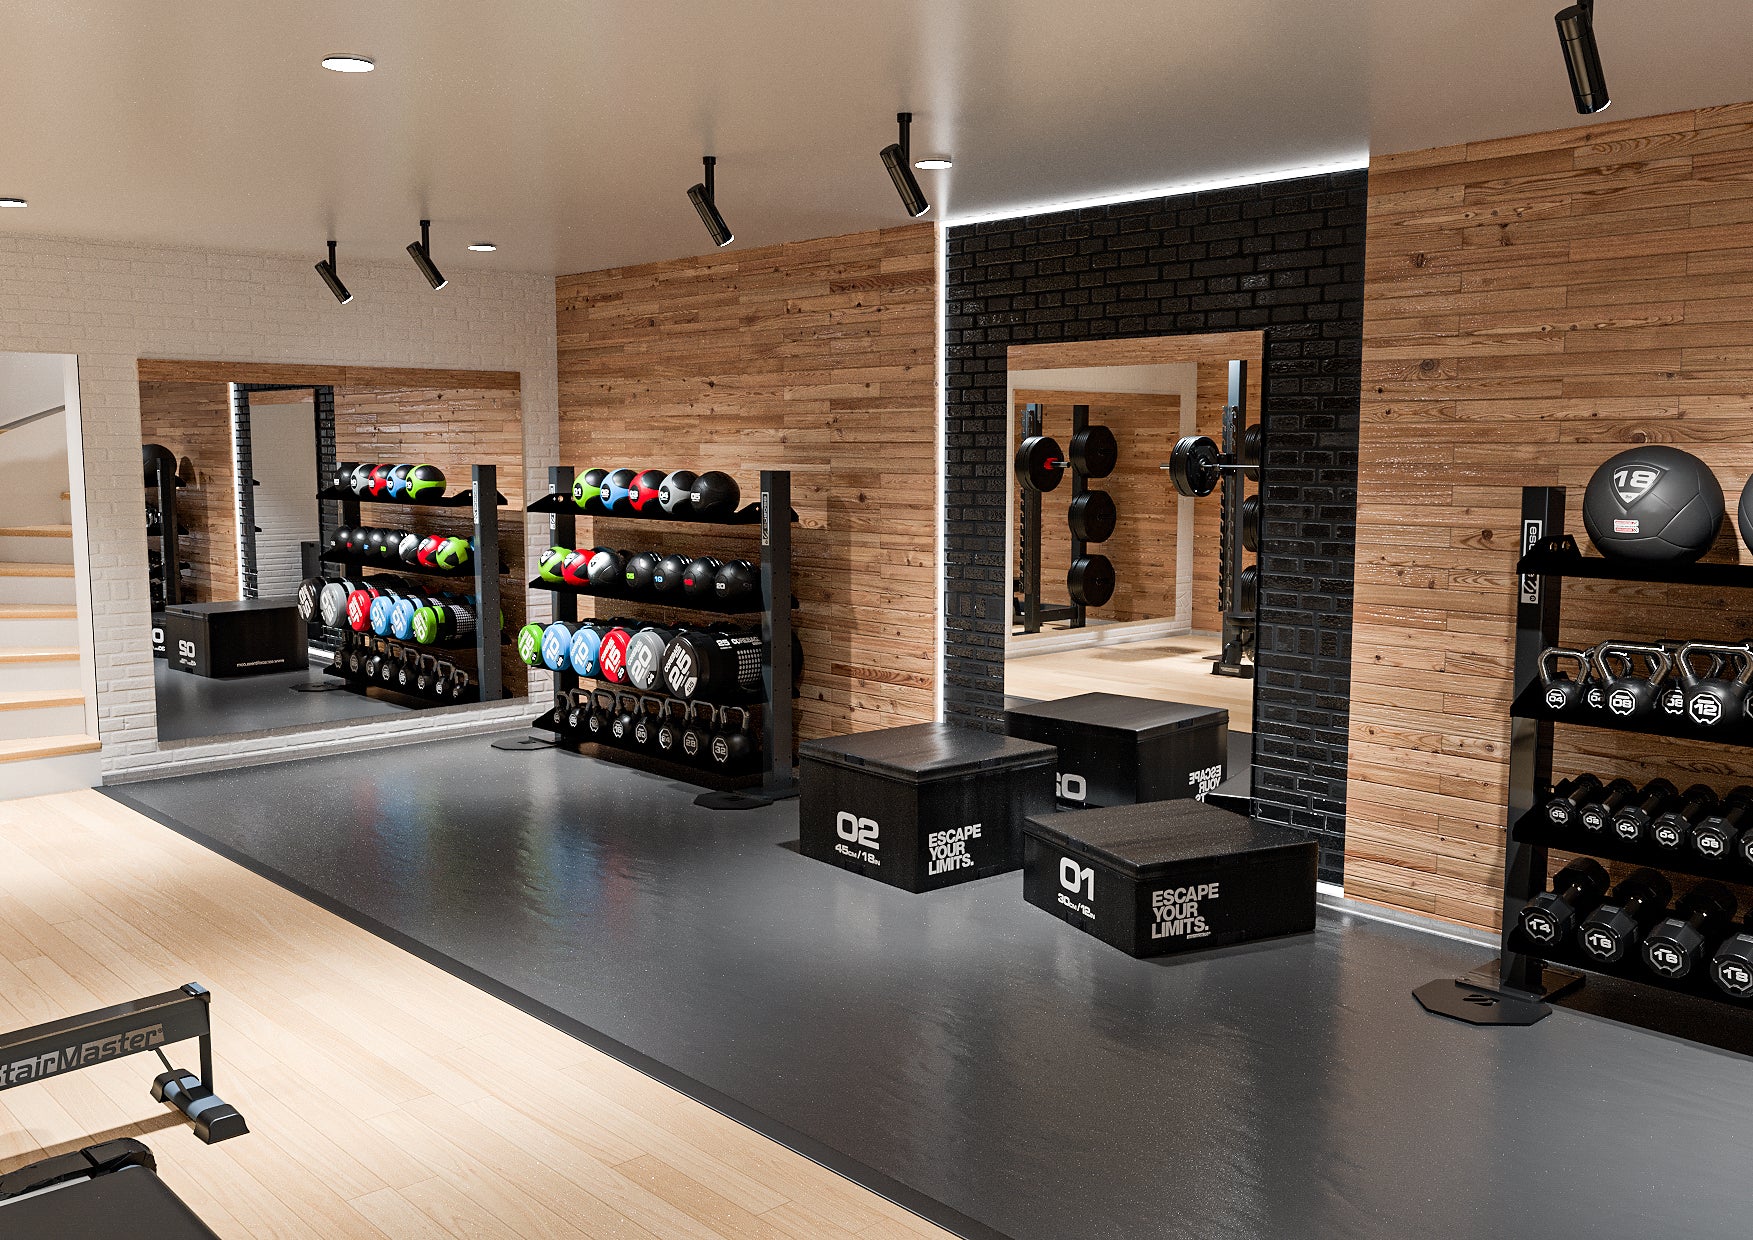 Ideas for a Basement Gym Design and Conversion